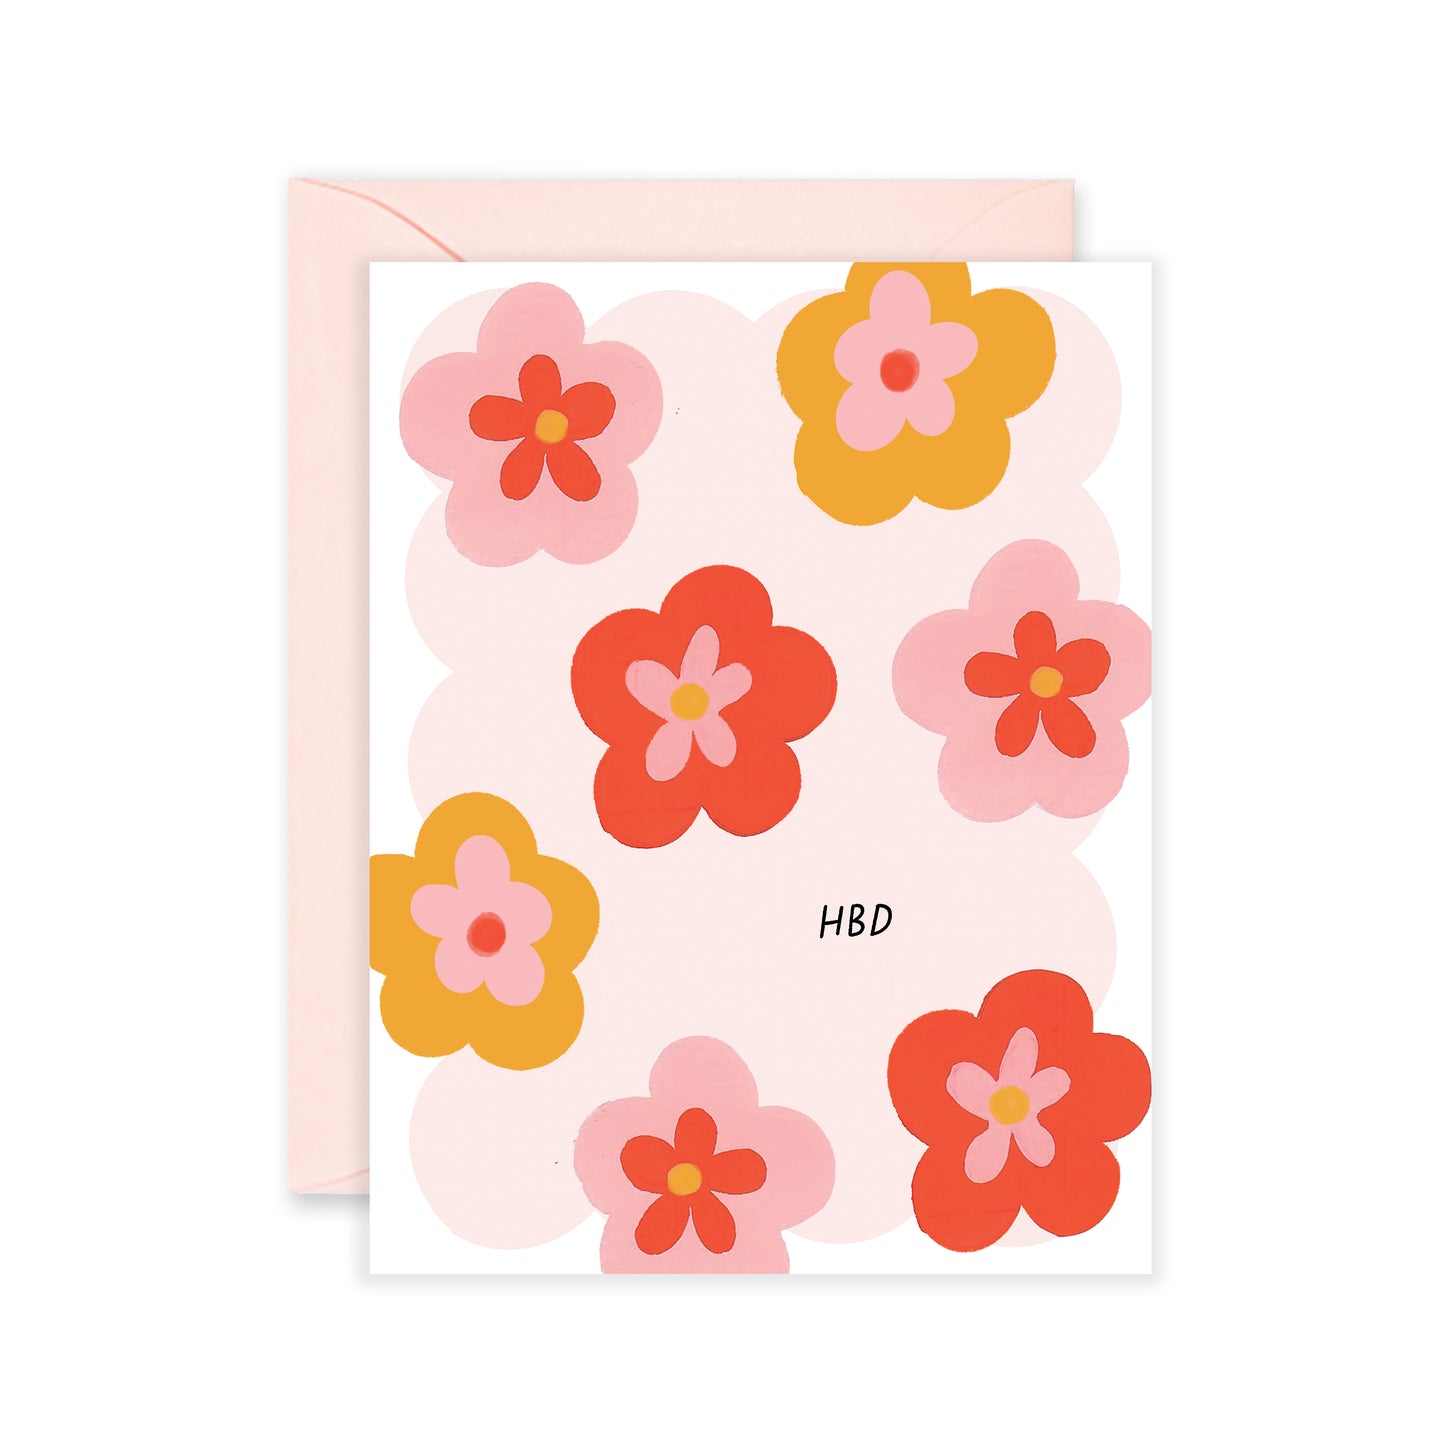 HBD Playful Flowers Greeting card